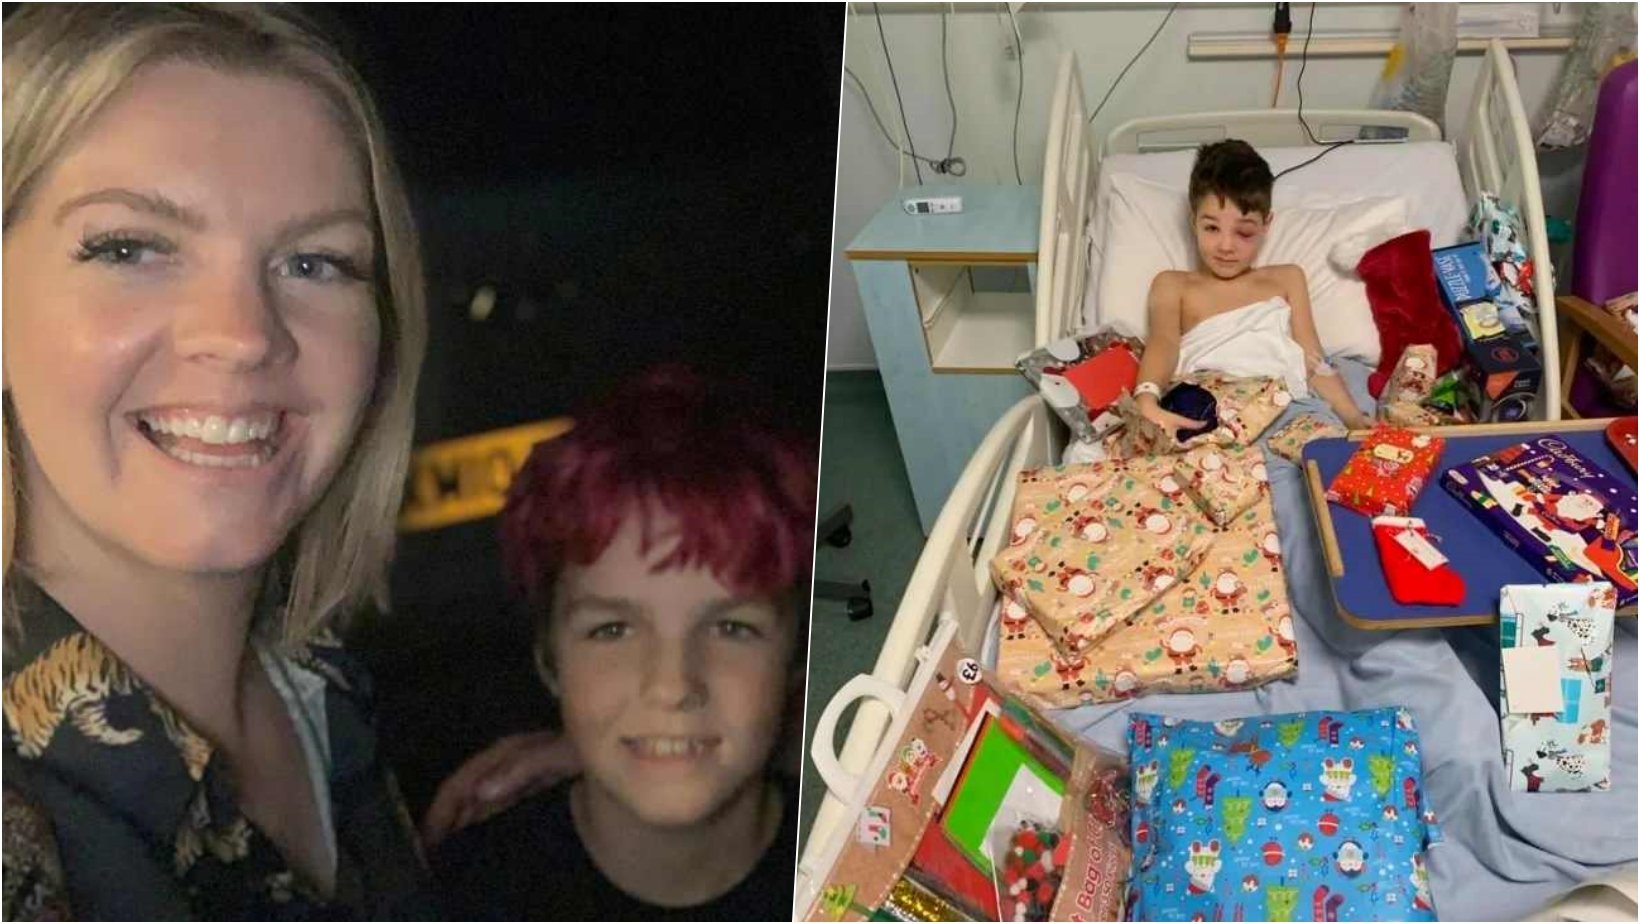 6 facebook cover 1.jpg?resize=412,232 - 9-Year-Old Boy Spends Christmas In Hospital After Being Infected With “COVID EYE”